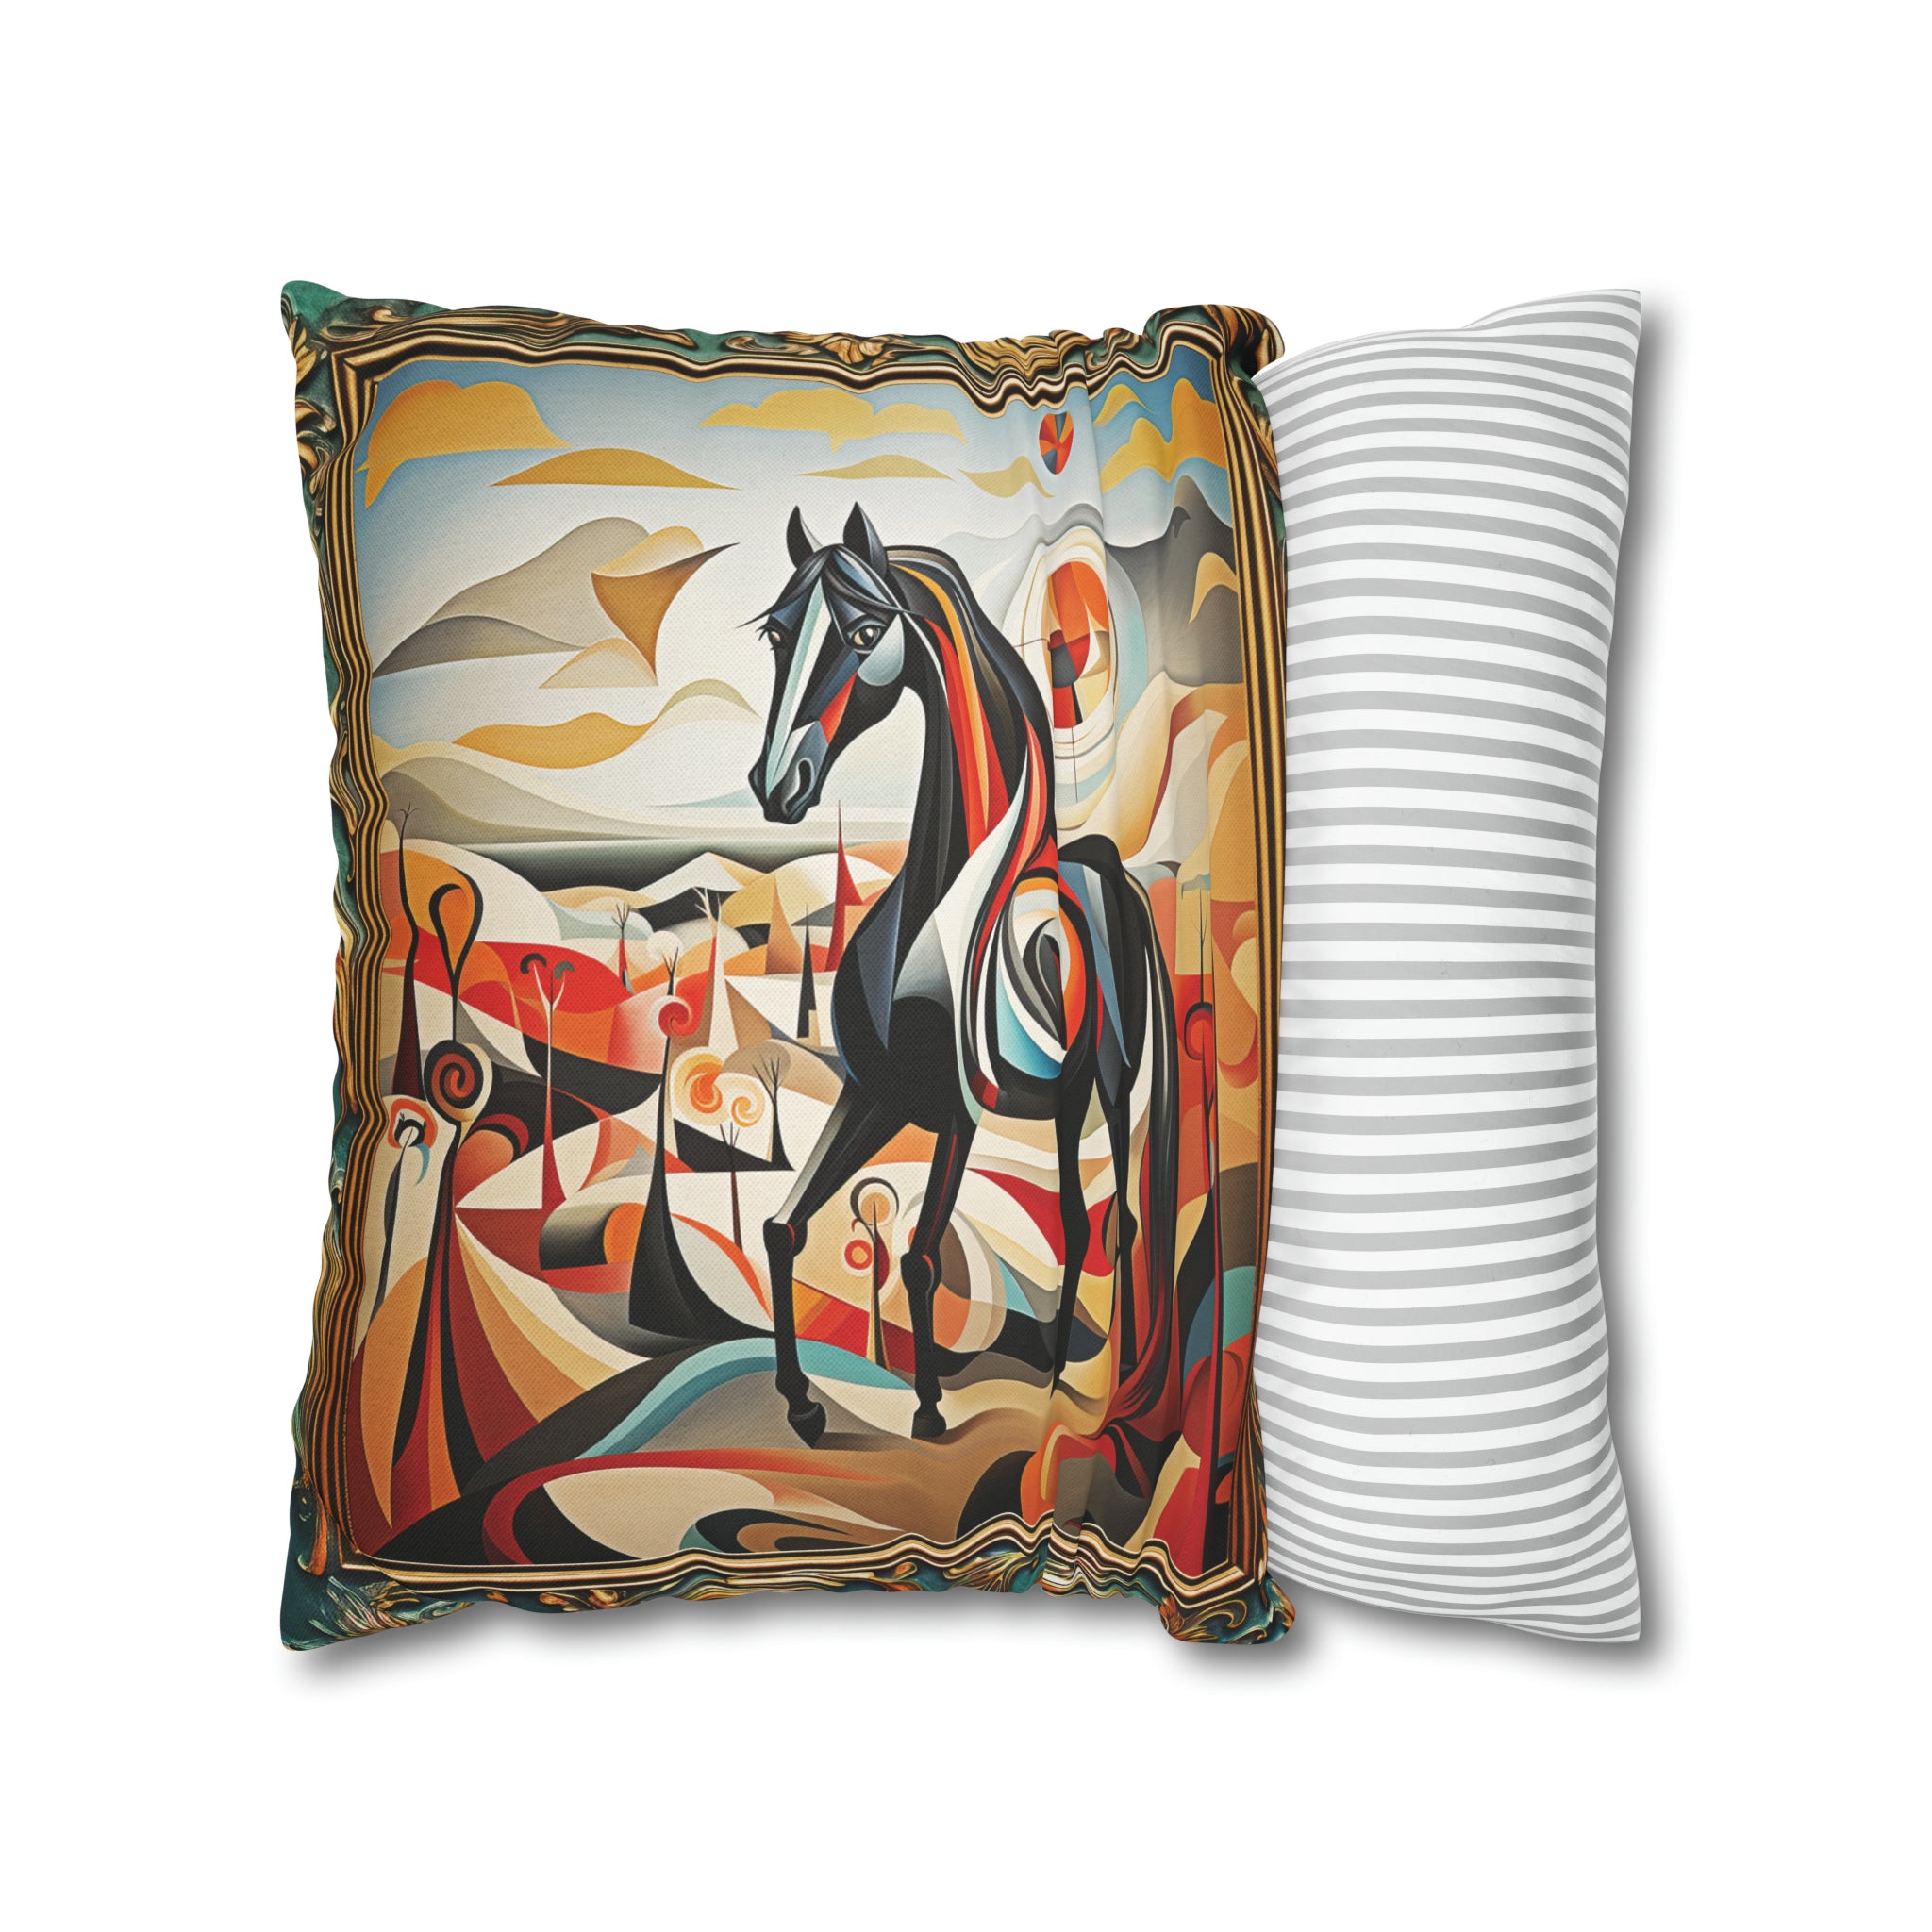 Square Pillow Case 18" x 18", CASE ONLY, no pillow form, original Art ,Colorful, Beautiful Cubist Style Horse on a colorful Landscape with Mountains